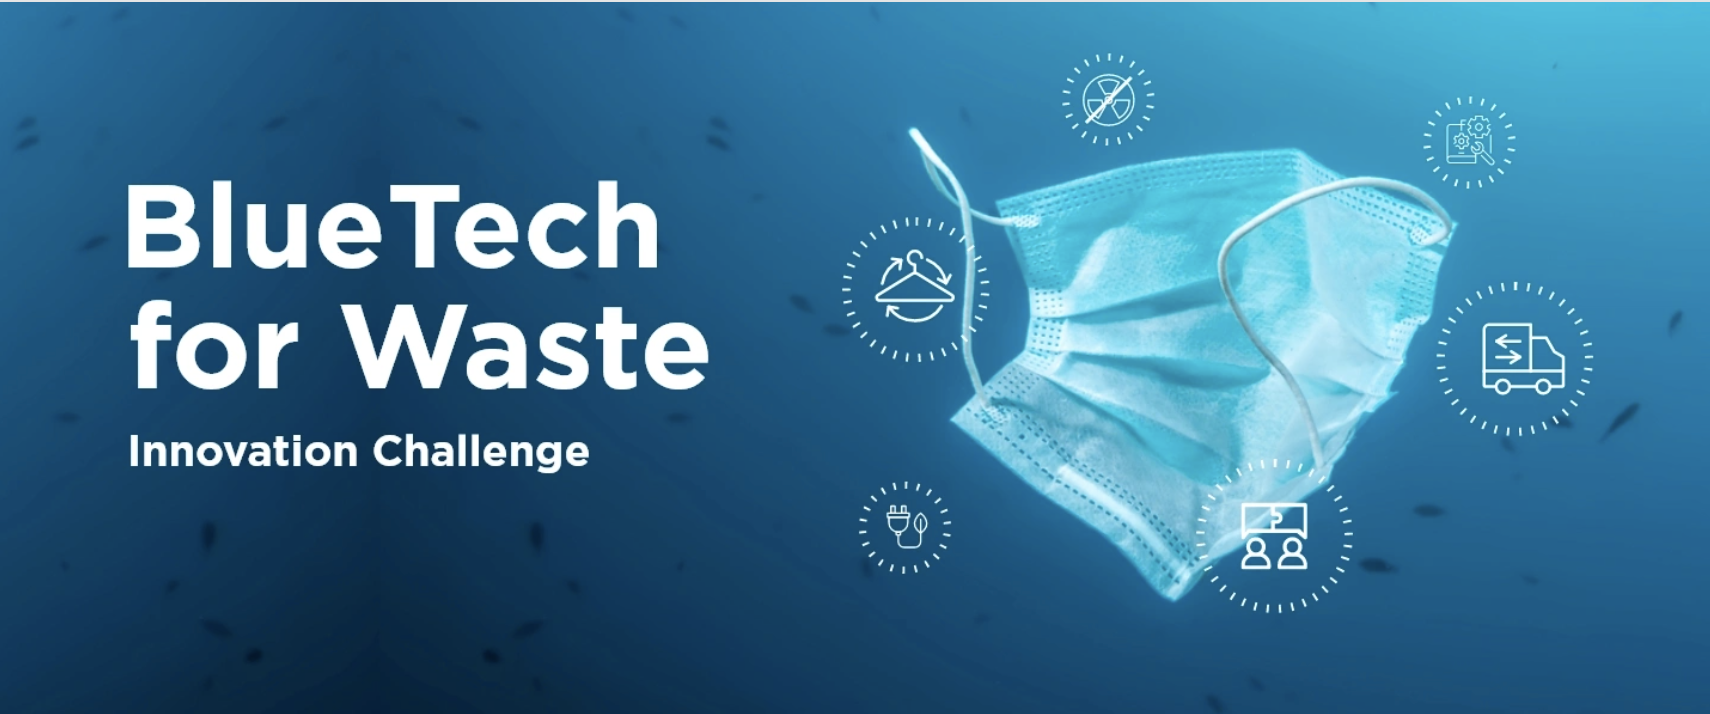 Blue Tech for Waste